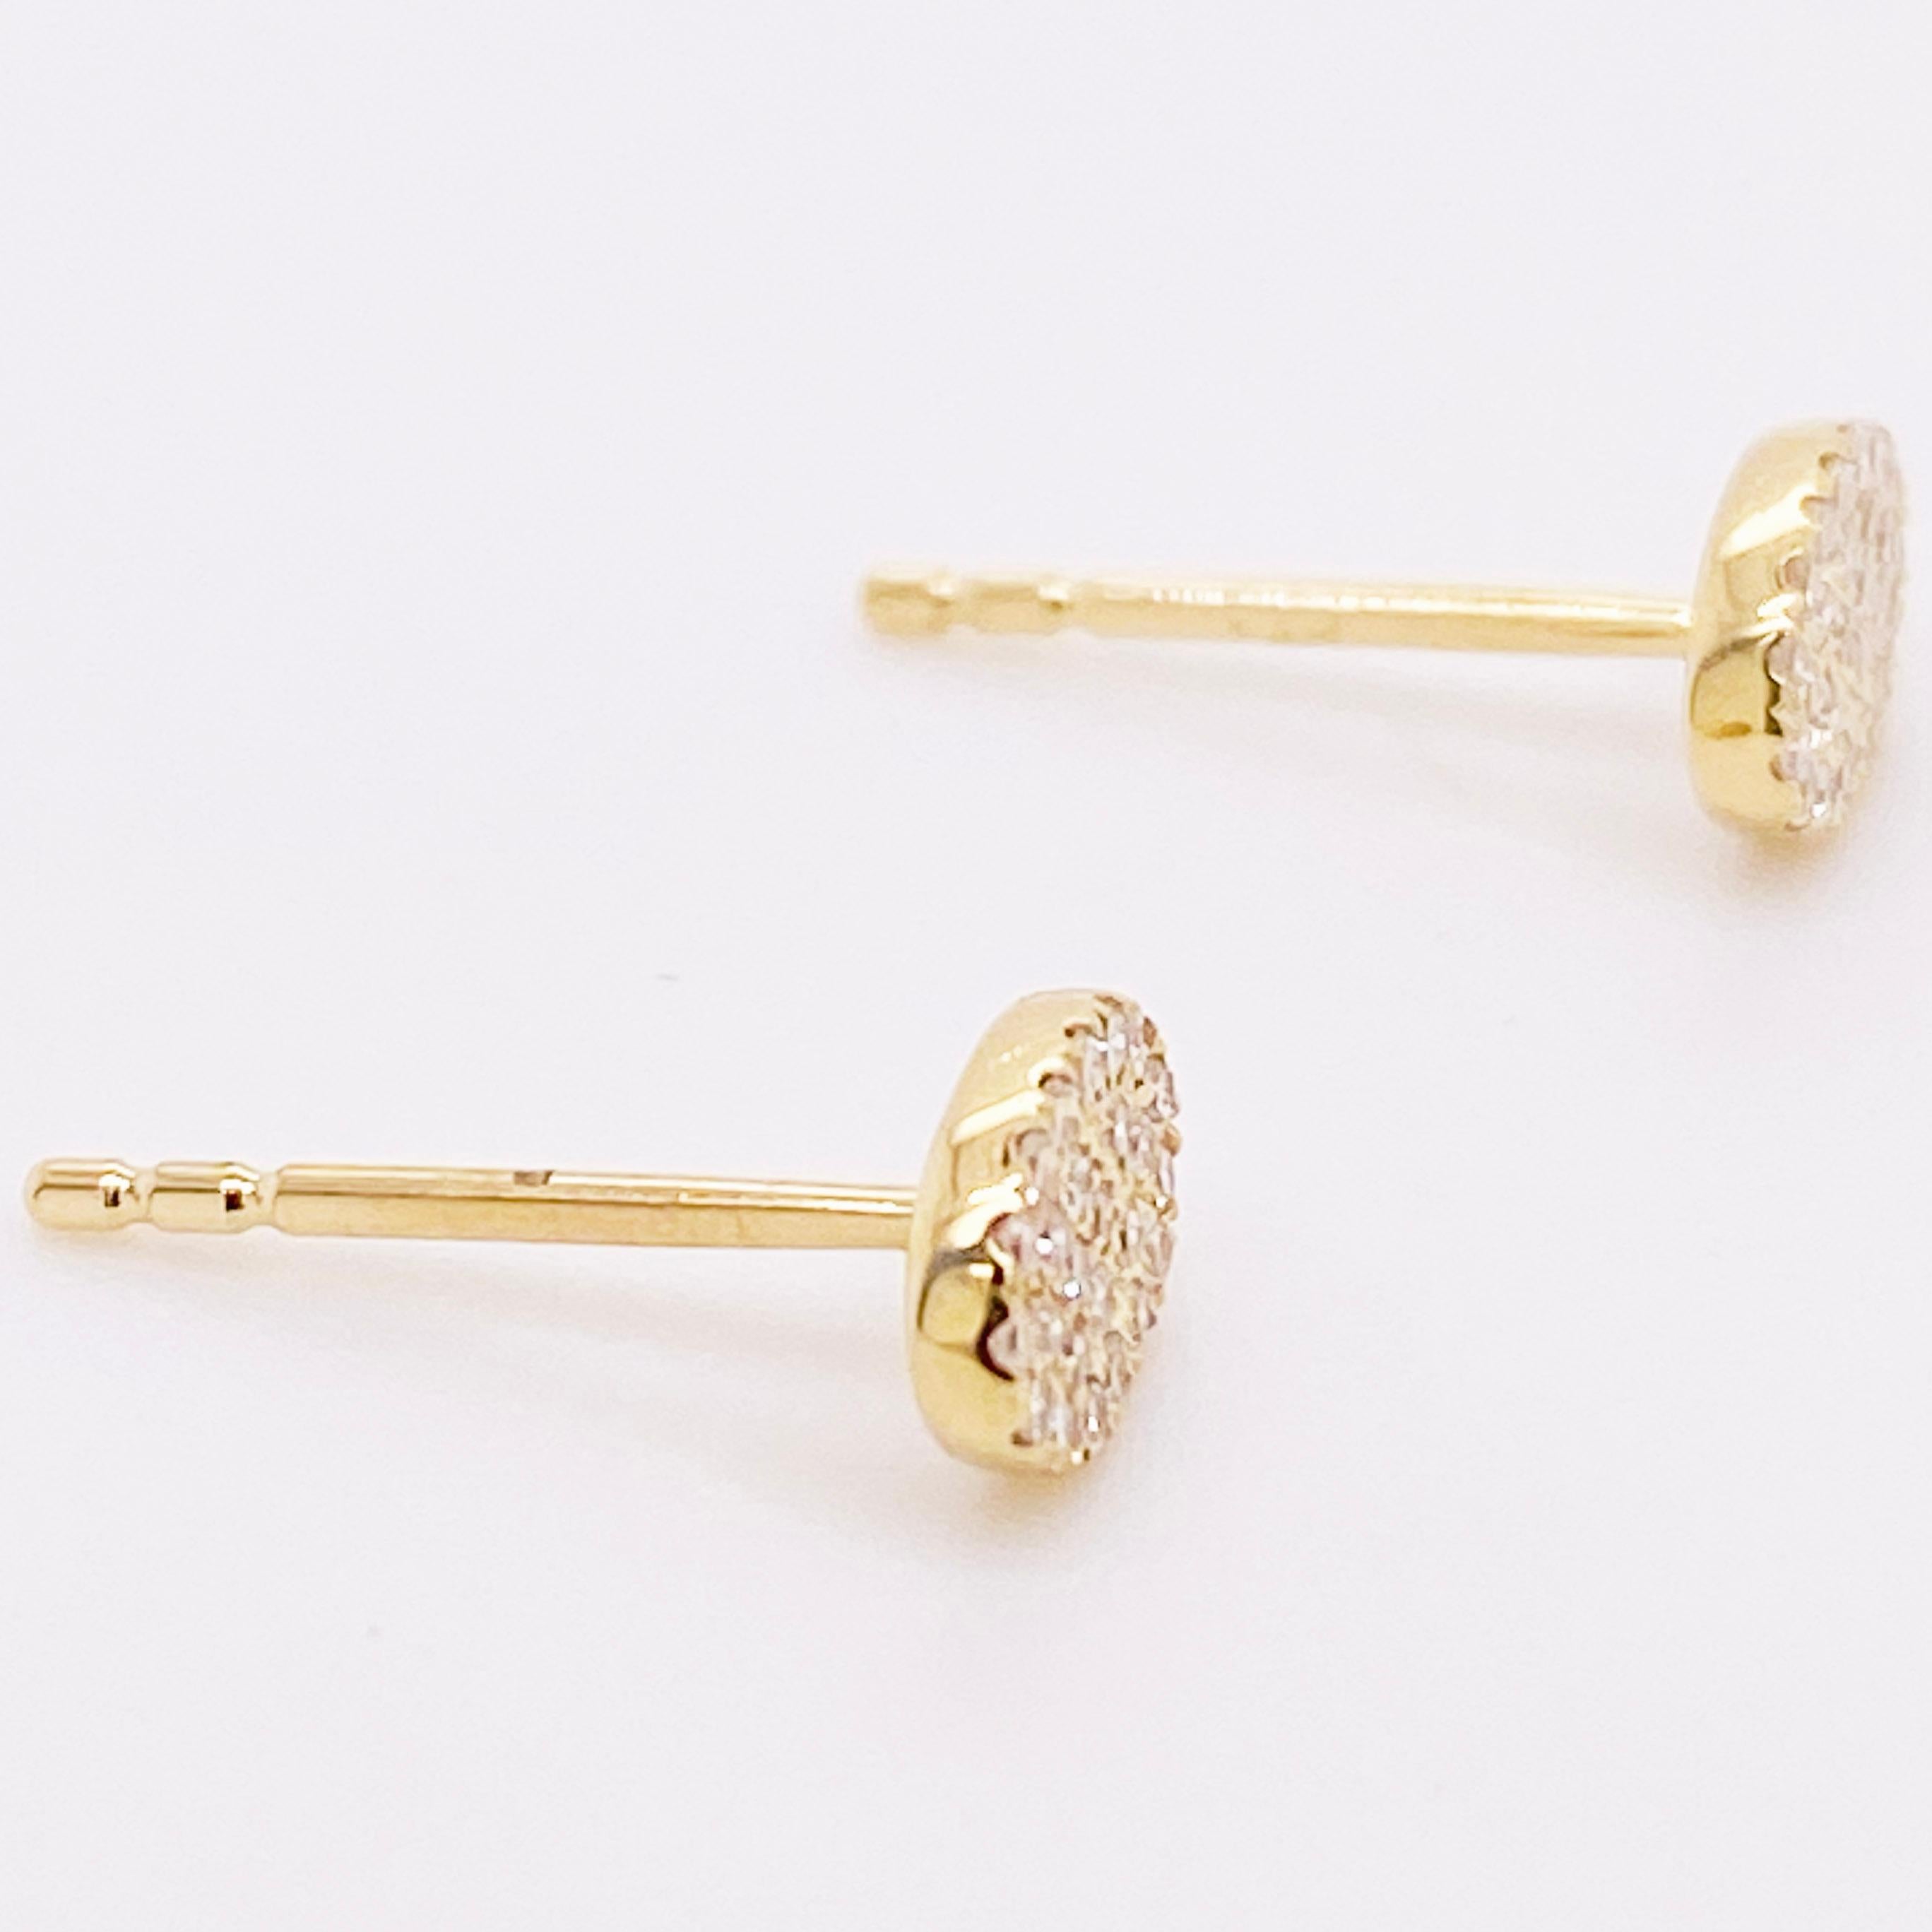 Round Cut Pave Diamond Earrings, Yellow Gold Oval Pave Studs, Diamond Studs For Sale